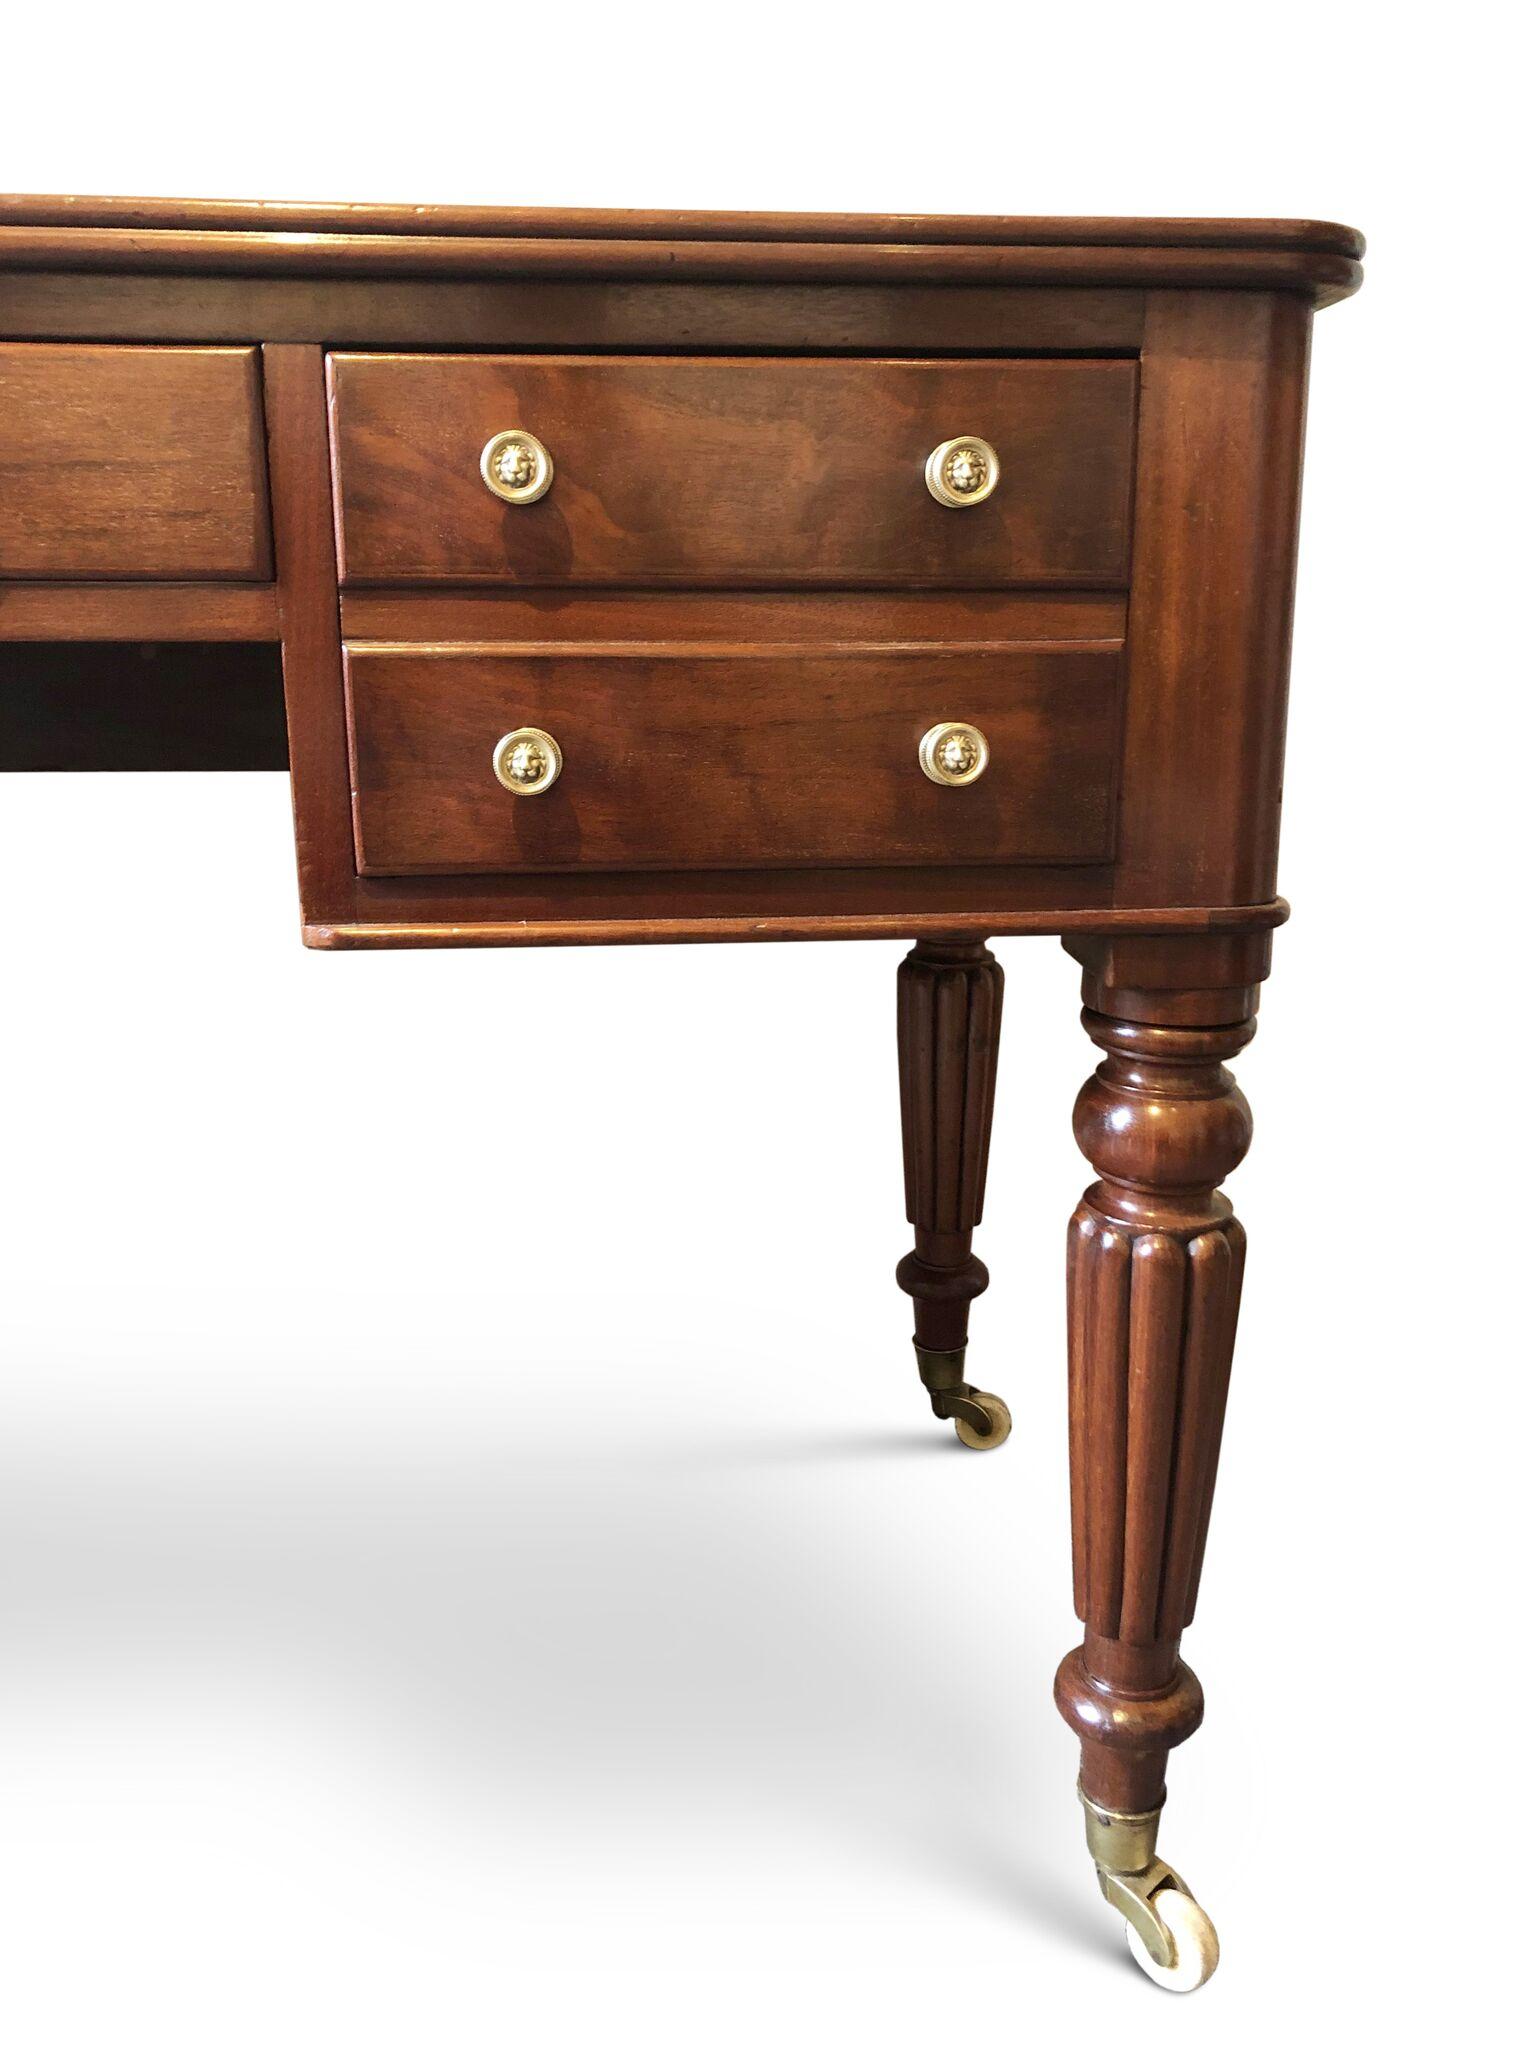 Mahogany writing table/desk of Gillows quality.
One piece nicely grained top with ribbed edge, single centre drawer flanked by two double depth drawers with dummy fronts and mahogany linings. Simple regency brass pressed knob handles, turned end